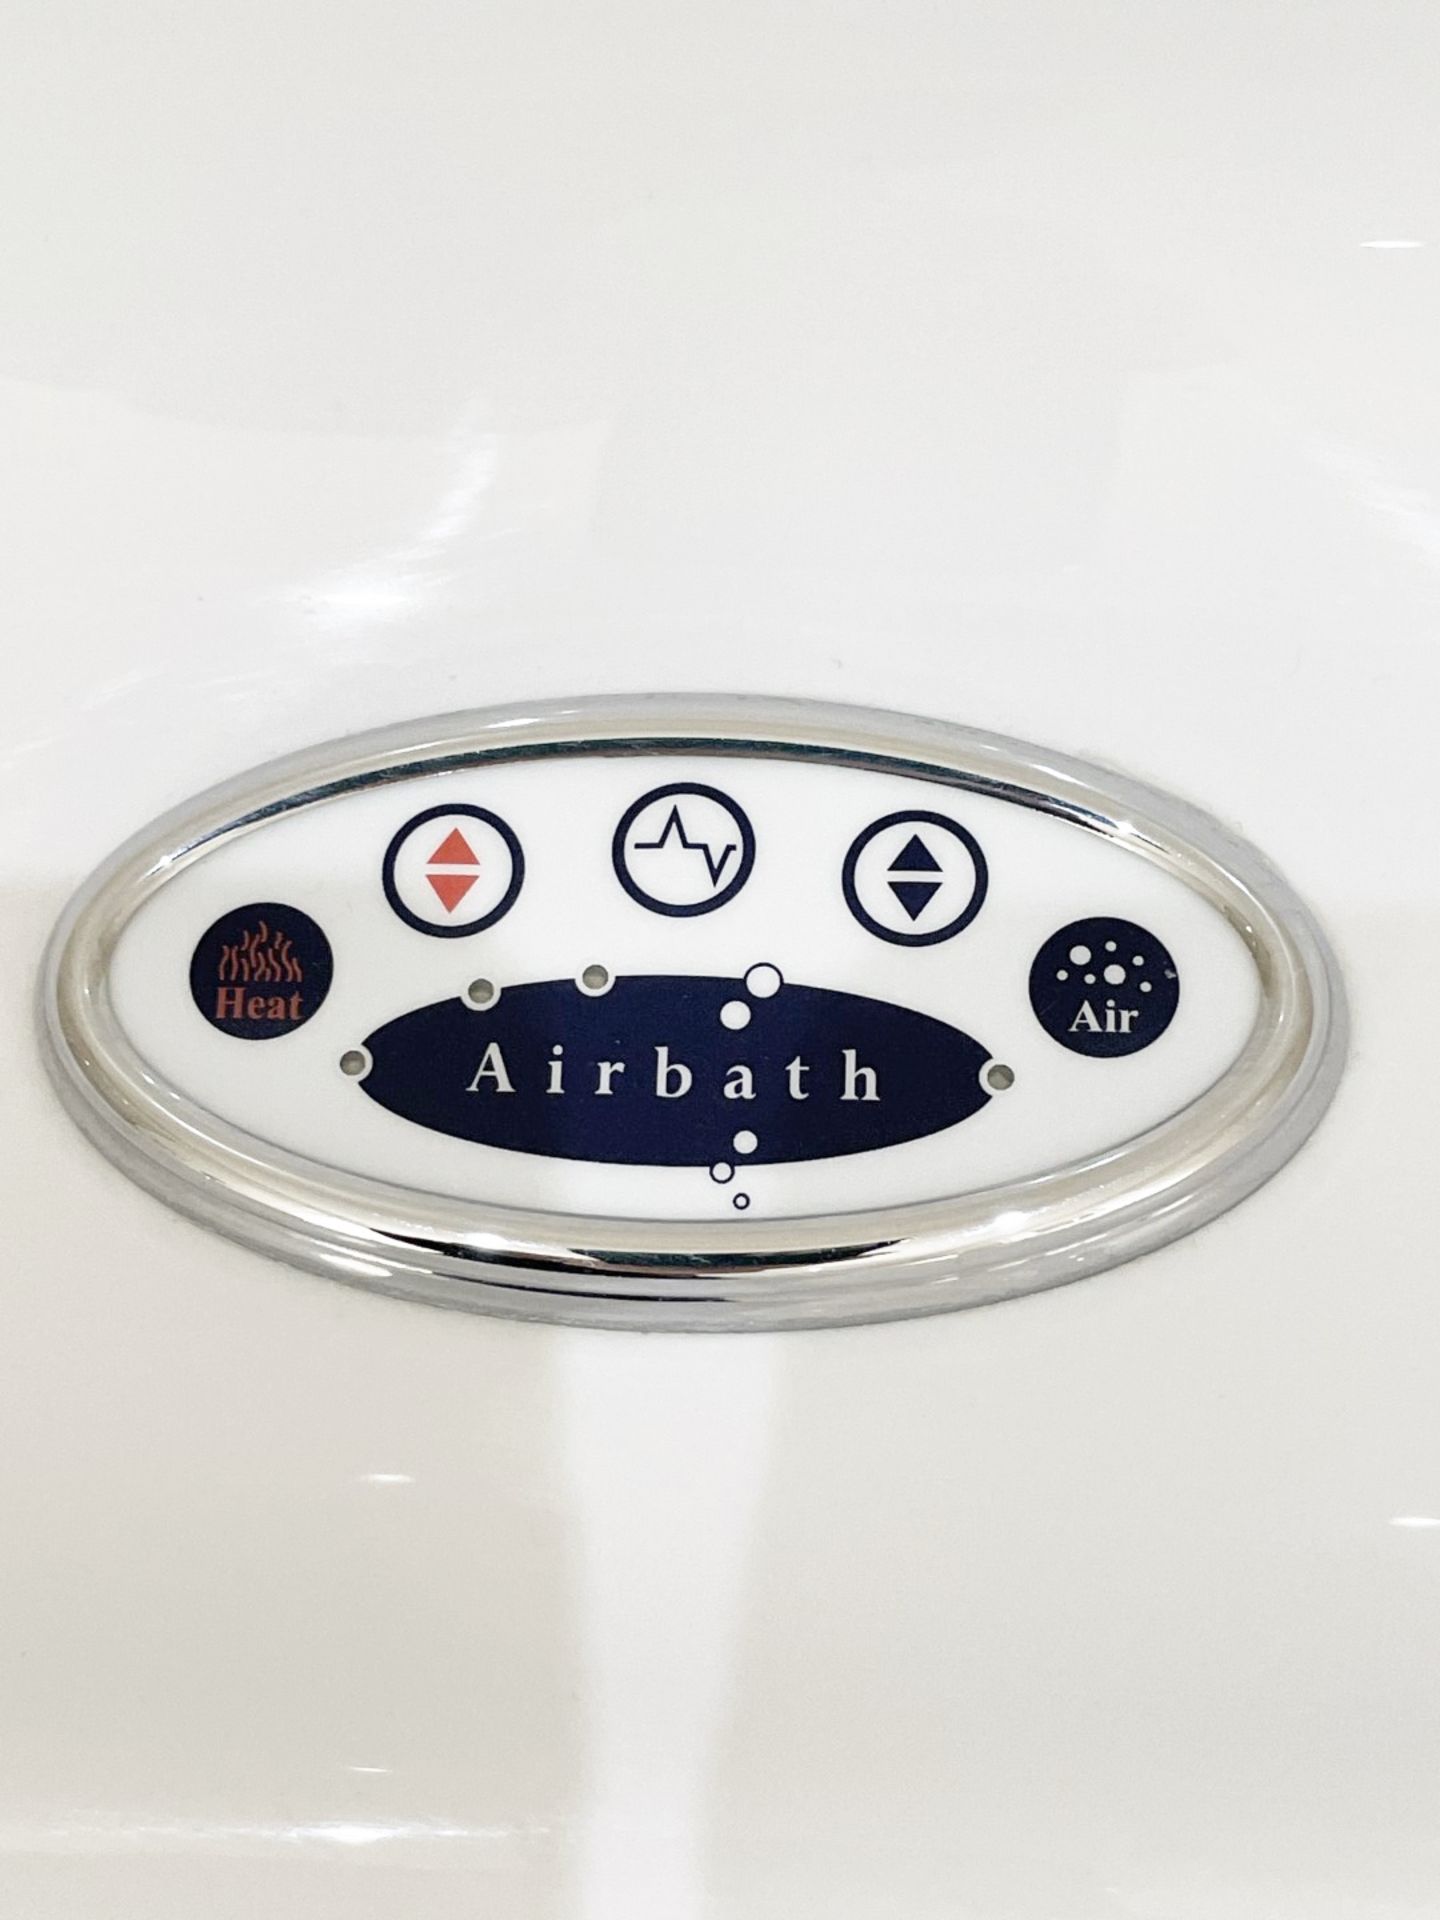 1 x AIRBATH Large Jacuzzi Spa Bath, with Axor Thermostat  - Ref: PAN230 Bed1/bth - CL896 - NO VAT - Image 18 of 20